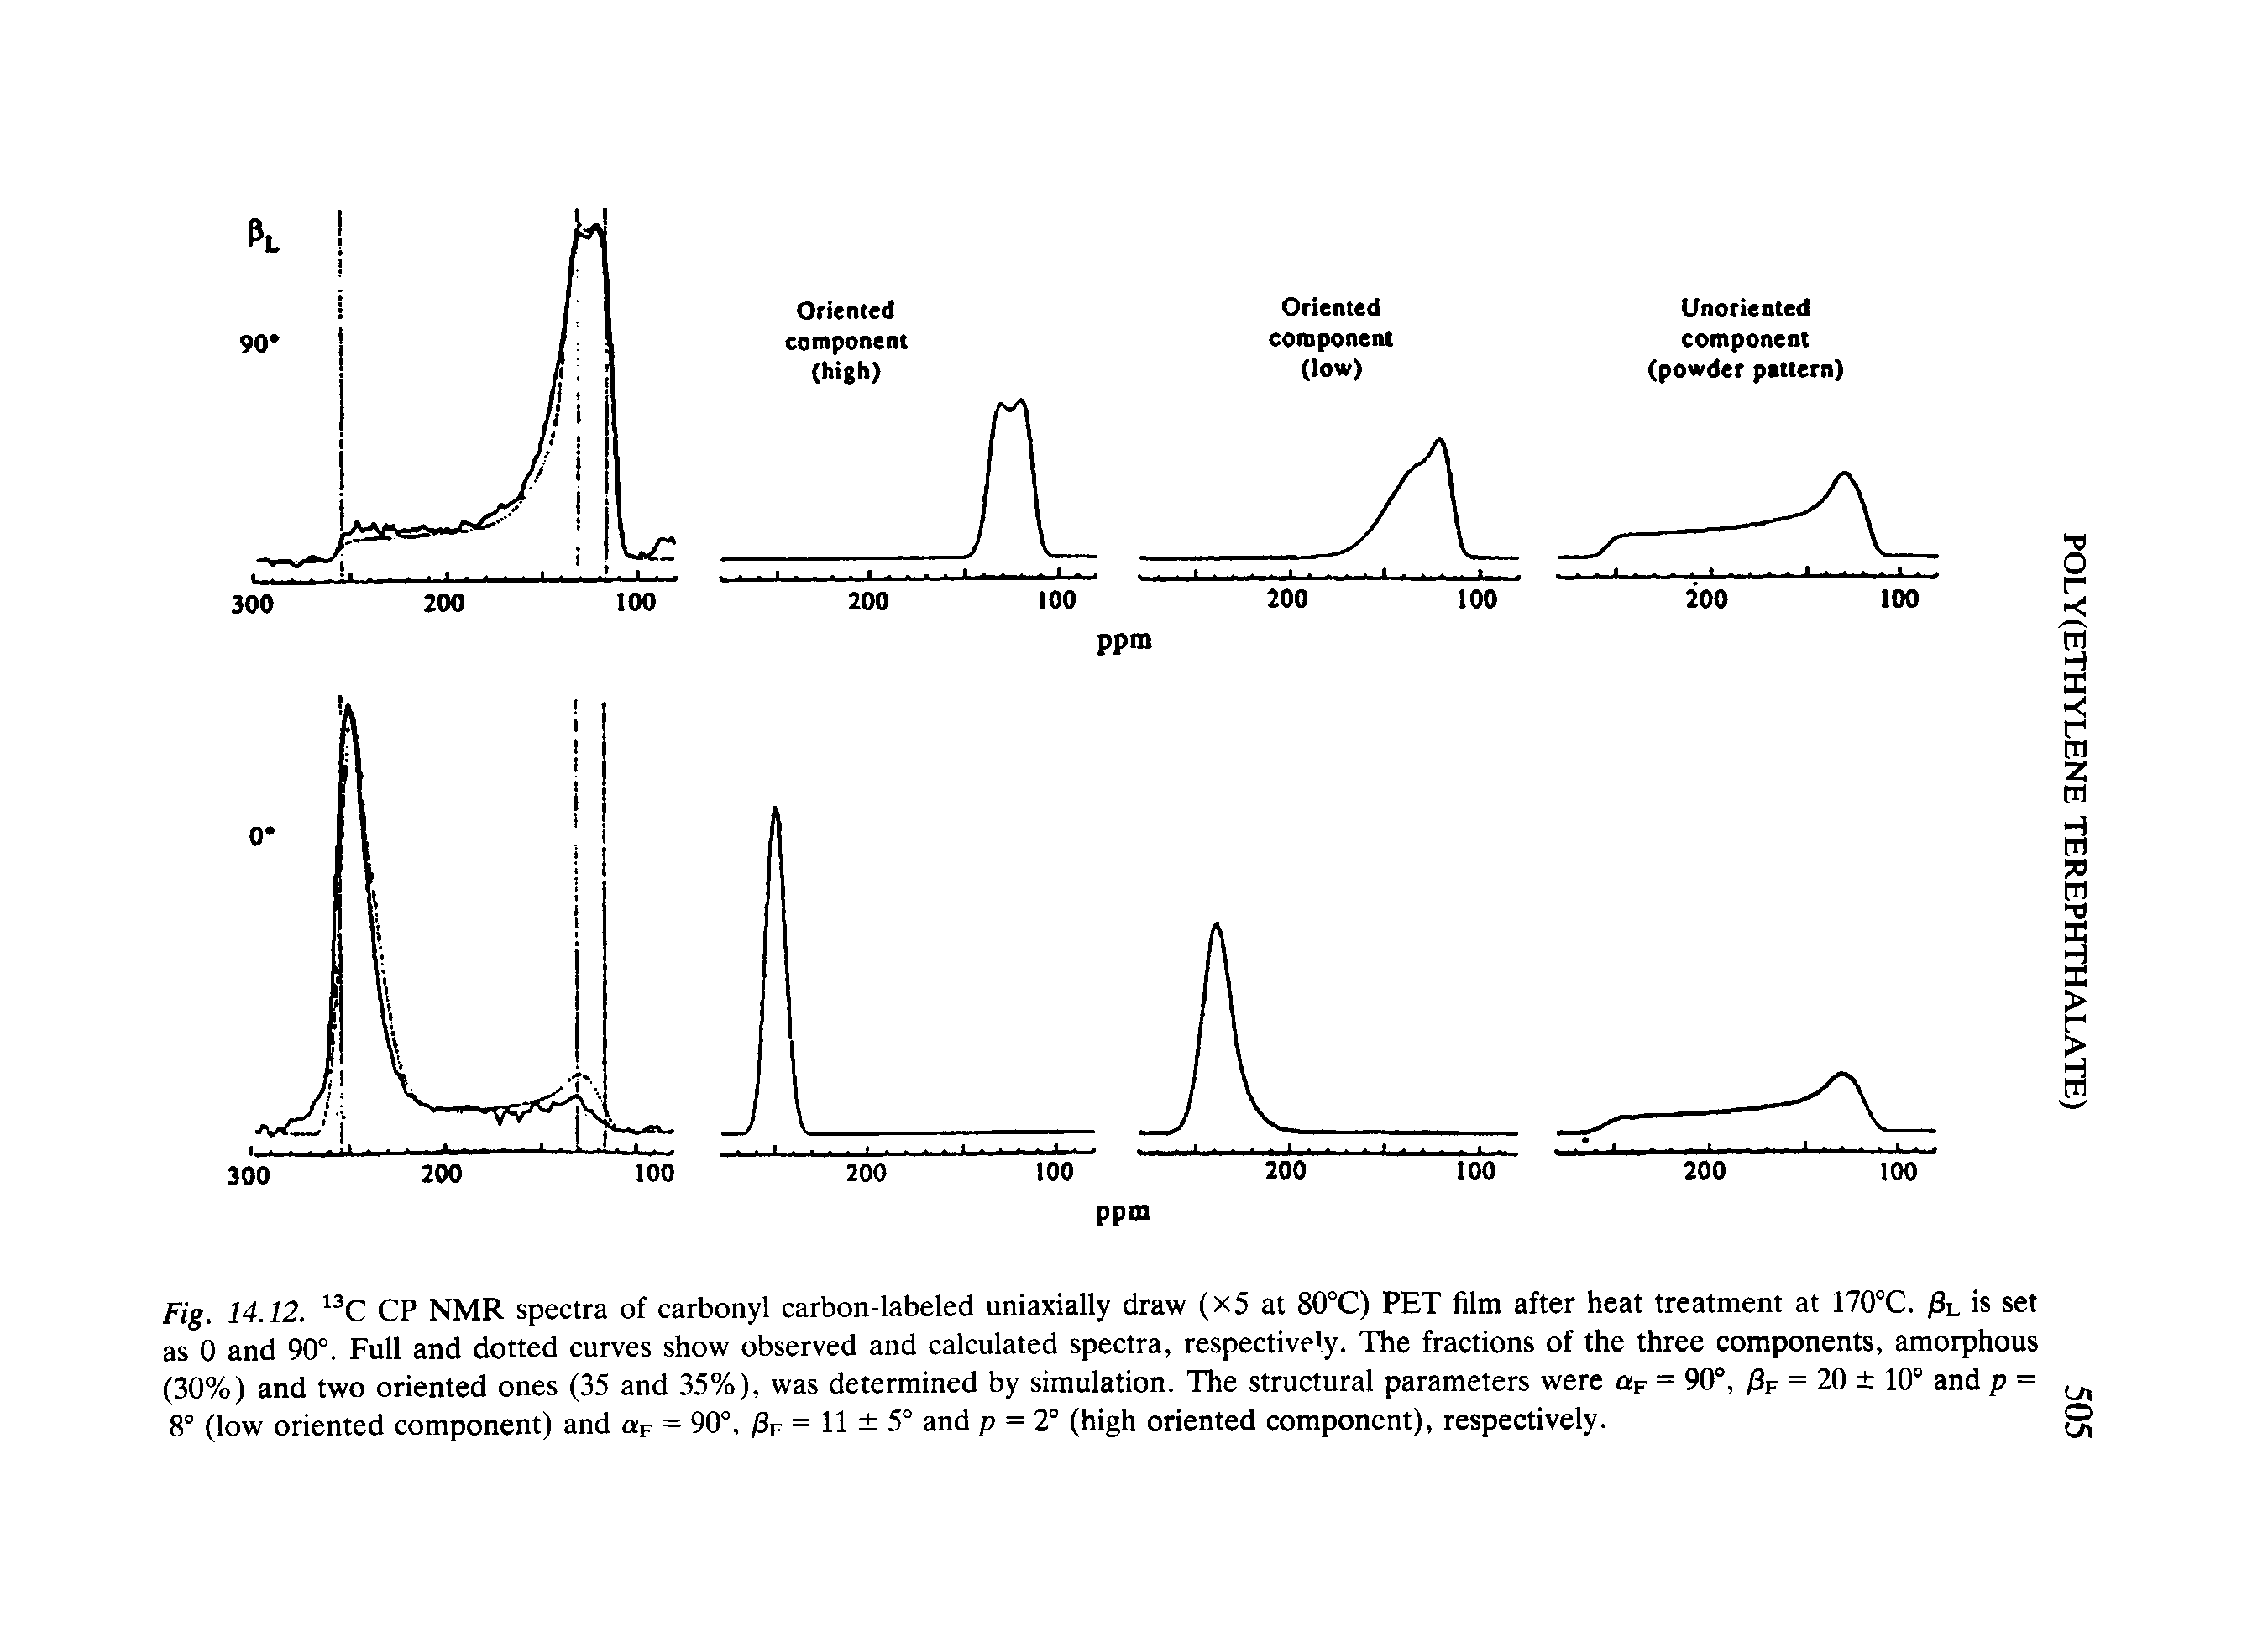 Fig. 14.12. CP NMR spectra of carbonyl carbon-labeled uniaxially draw (x5 at 80°C) PET film after heat treatment at 170°C. 8l is set as 0 and 90°. Full and dotted curves show observed and calculated spectra, respective y. The fractions of the three components, amorphous (30%) and two oriented ones (35 and 35%), was determined by simulation. The structural parameters were ap = 90°, ySp = 20 10° and p = 8° (low oriented component) and ap = 90°, )3f = 11 5° and p = 2° (high oriented component), respectively.